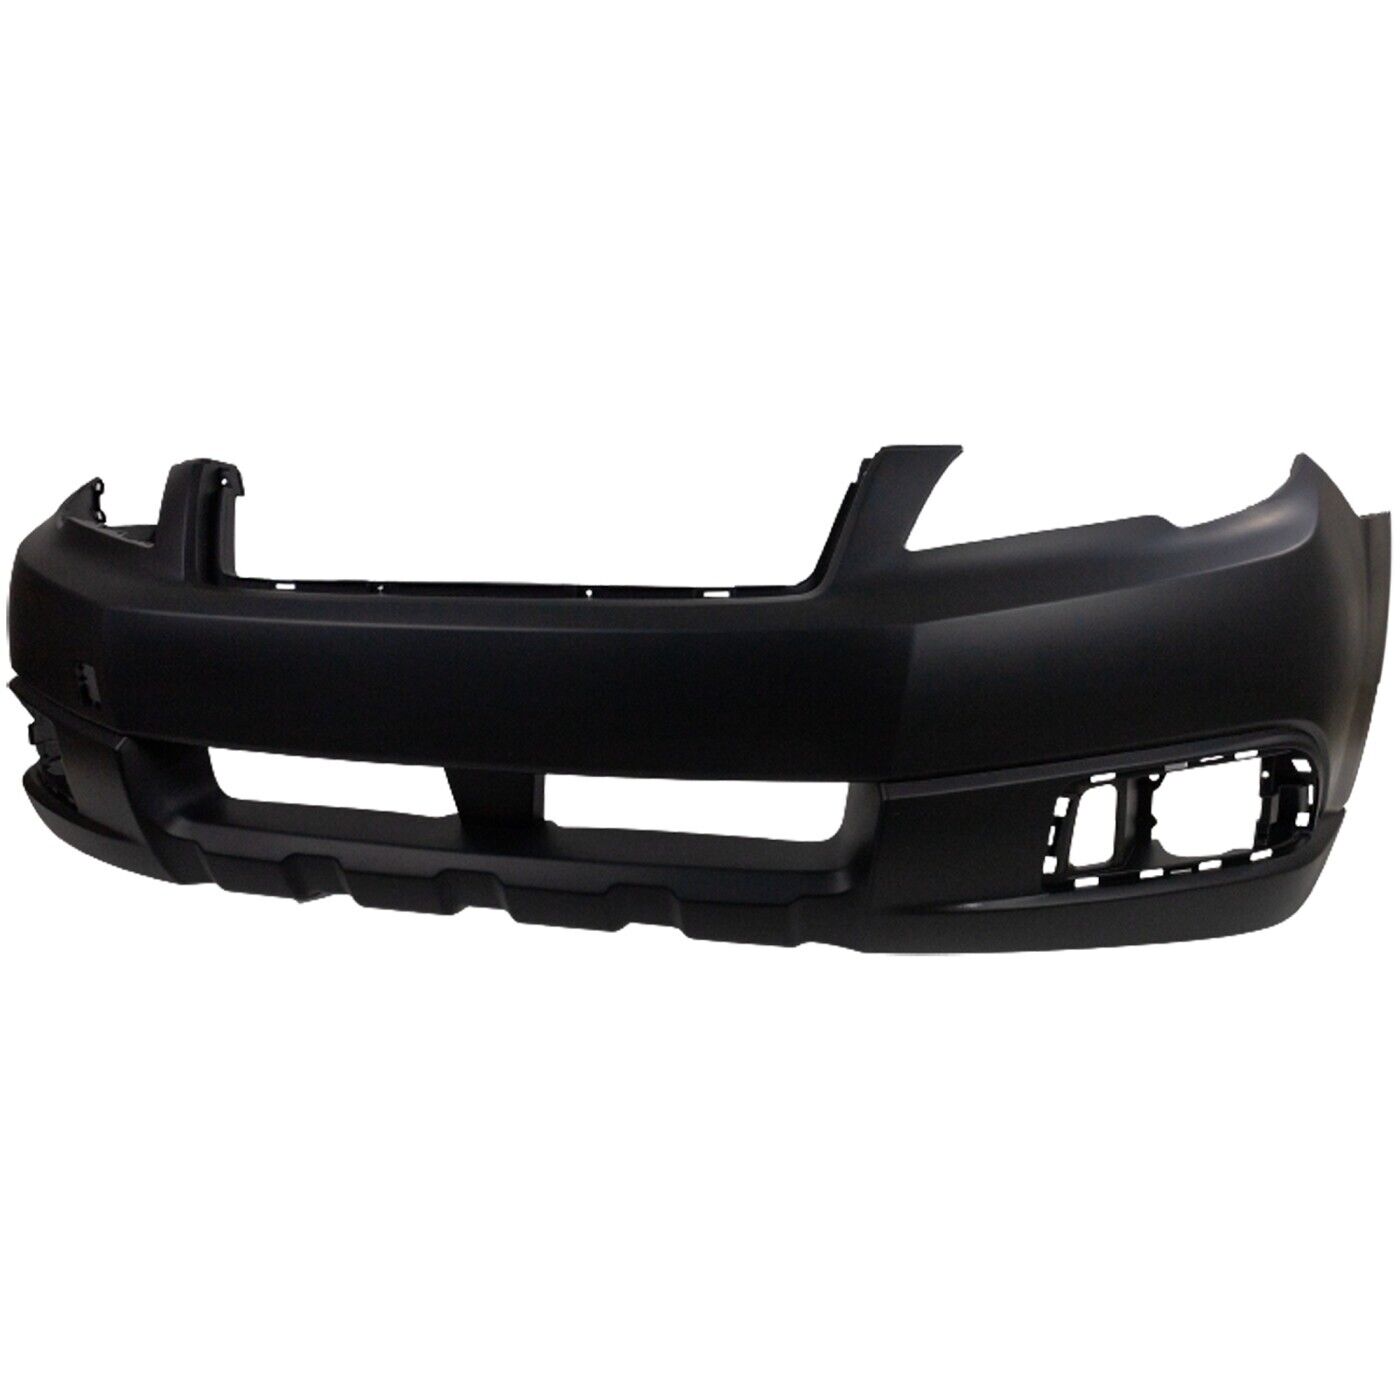 Front Bumper Cover For 2010-2012 Subaru Outback w/ fog lamp holes Primed